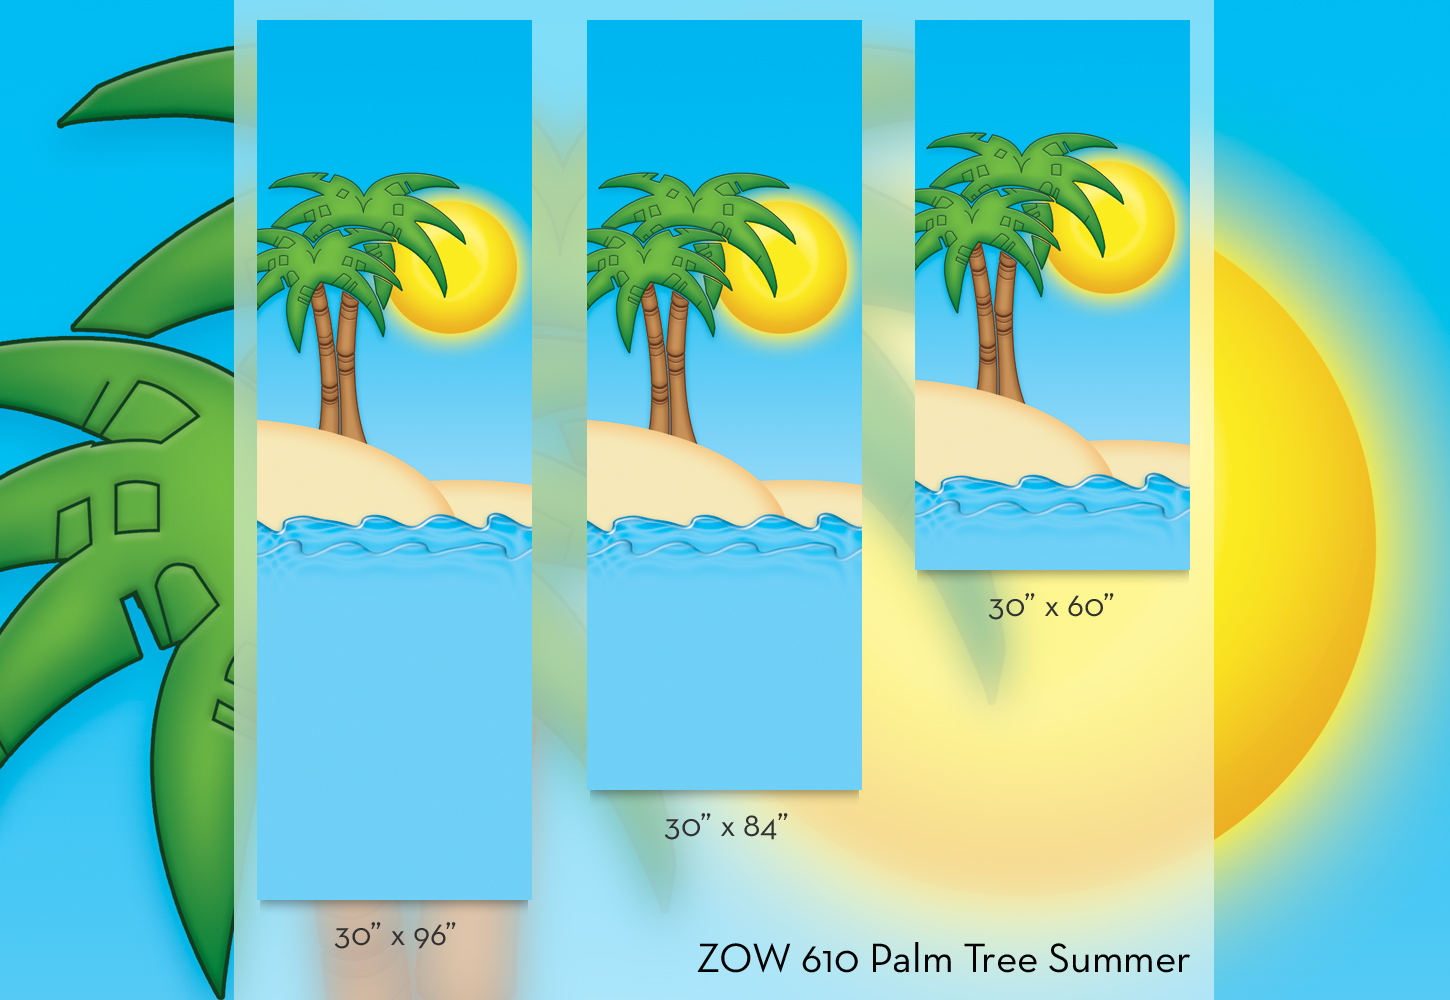 ZOW 610 Palm Tree Summer